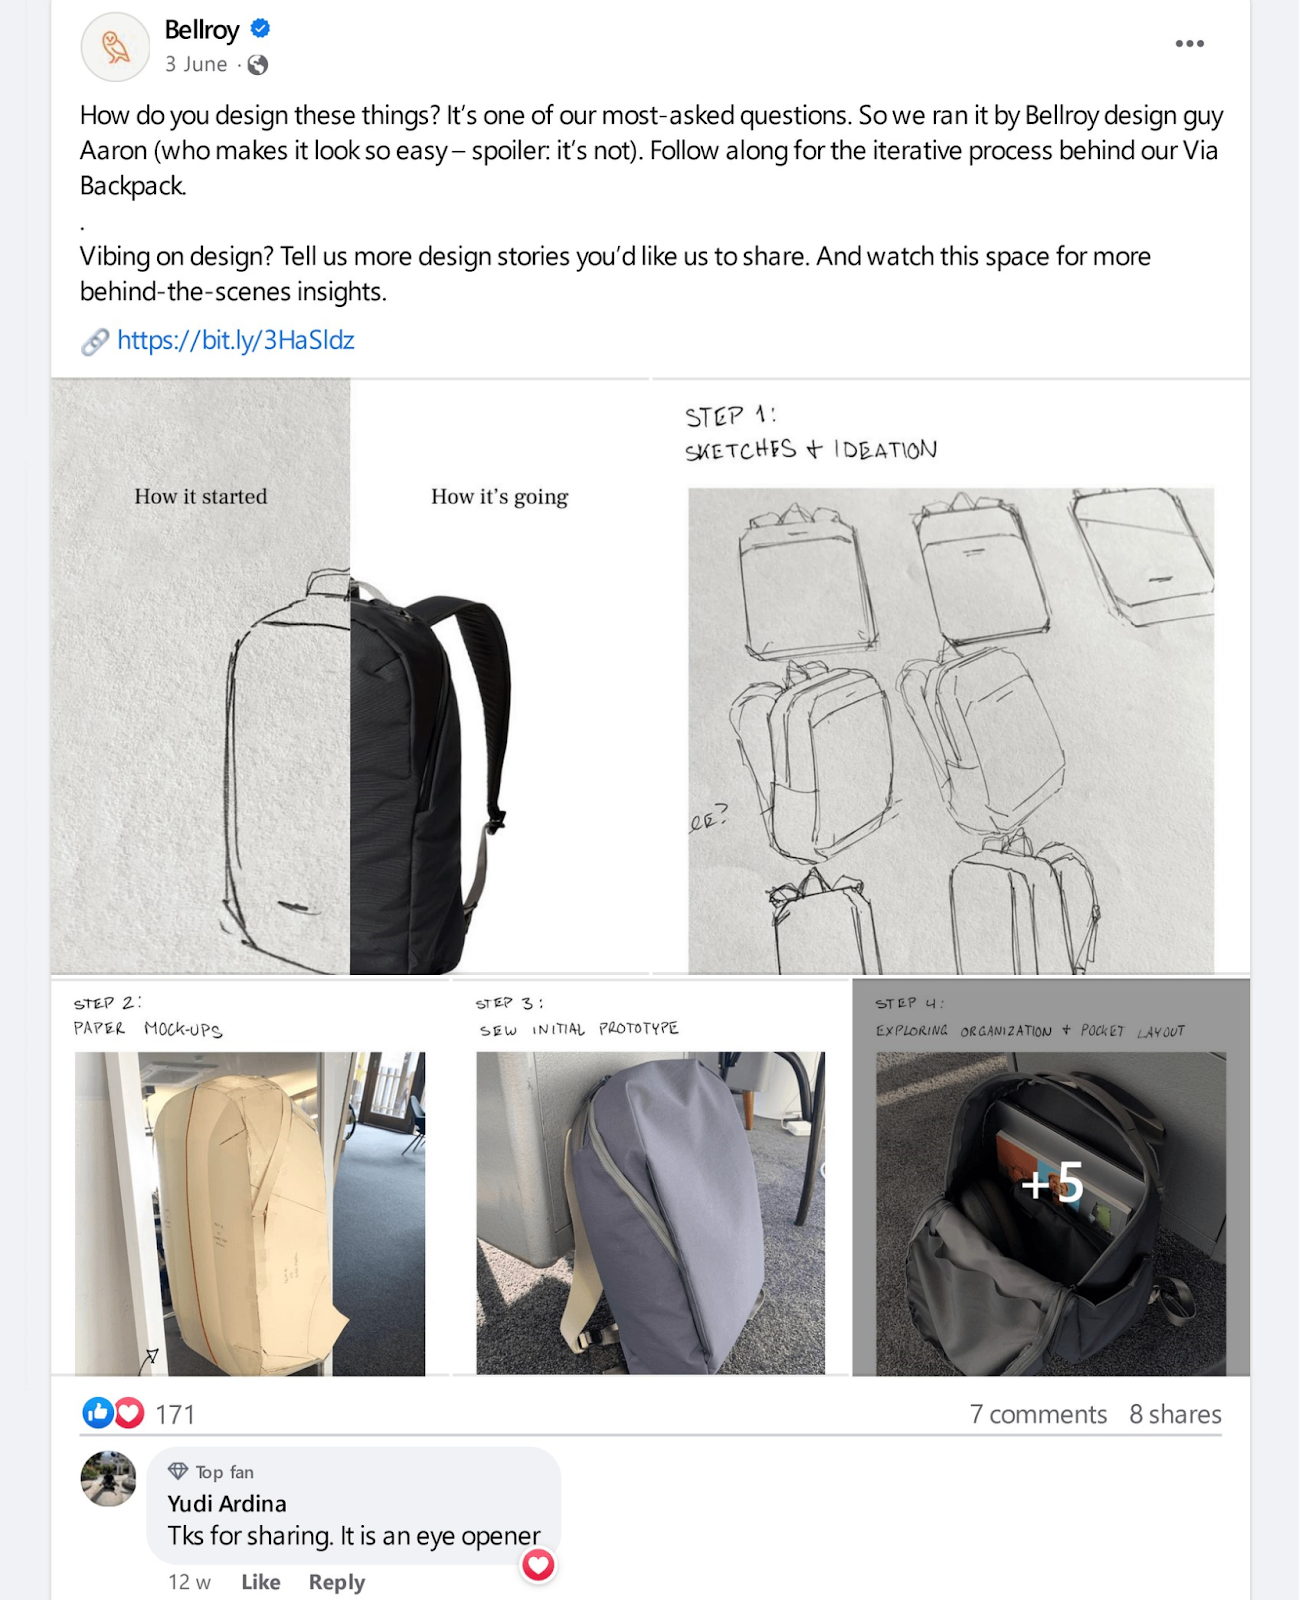 Bellroy post on Facebook about their design process